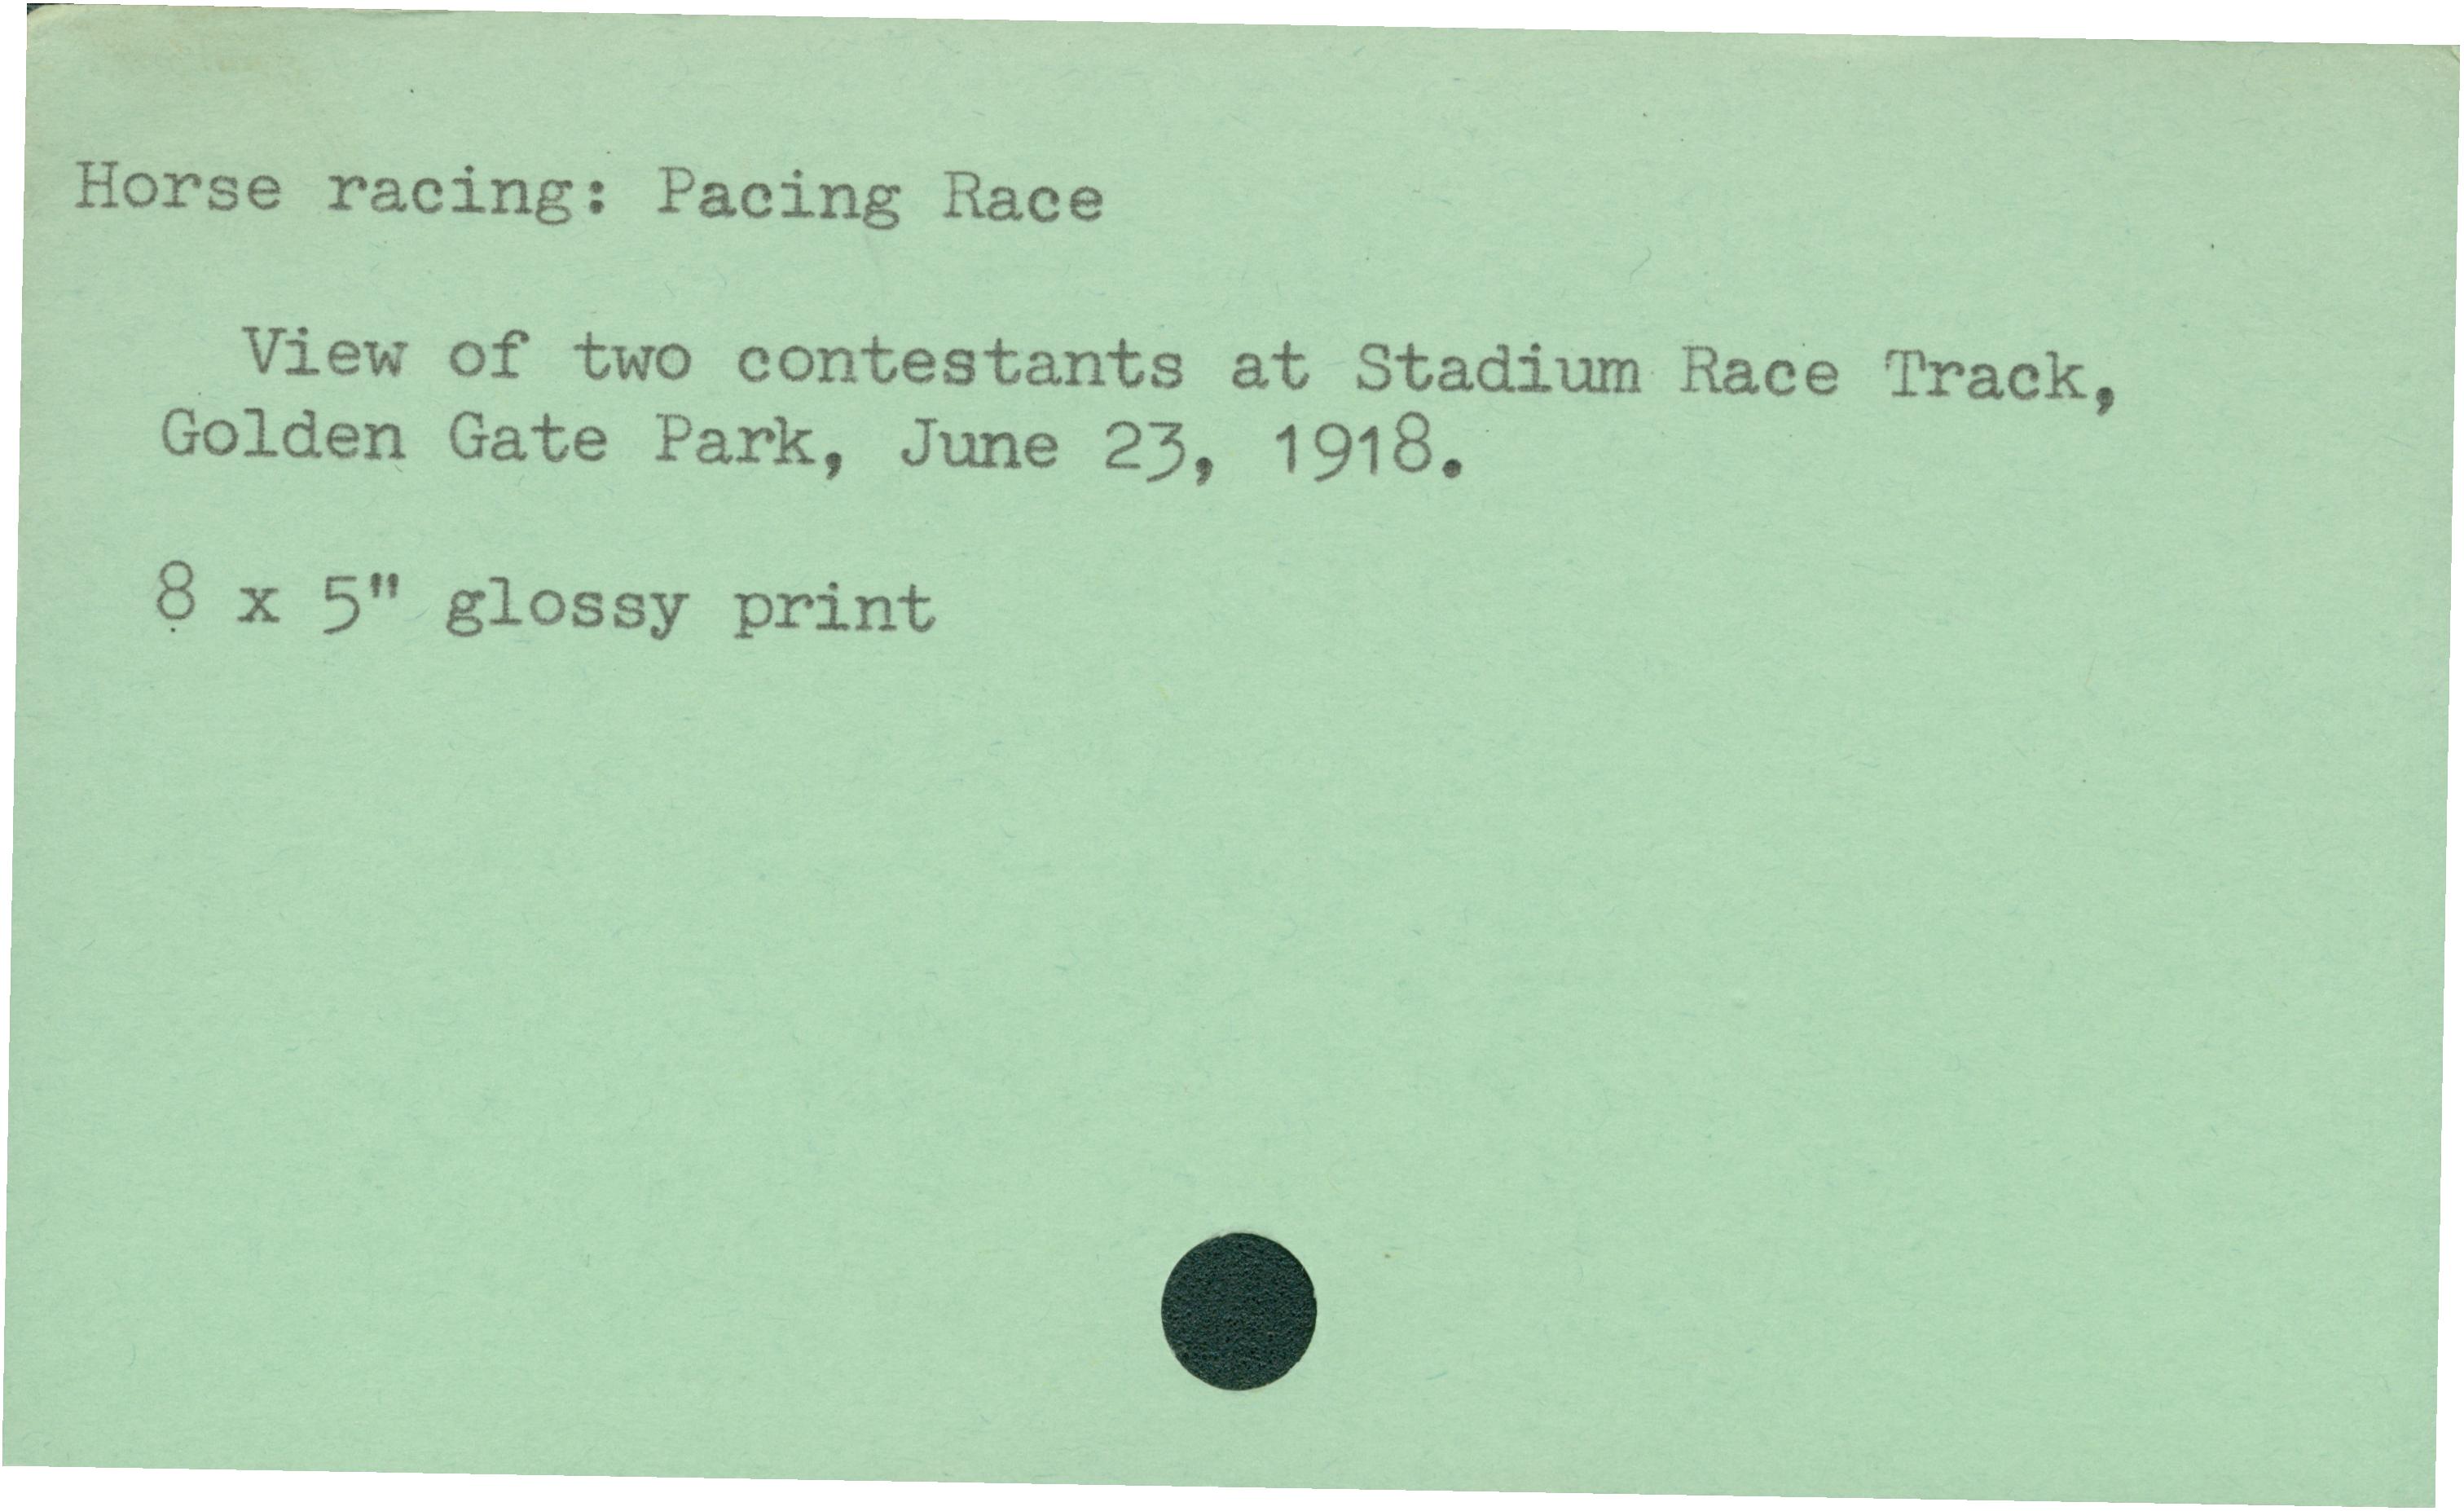 Horse Racing: Pacing RaceView of two contestants at Stadium Race Track, Golden Gate Park 1918, June 238 x 5 glossy print